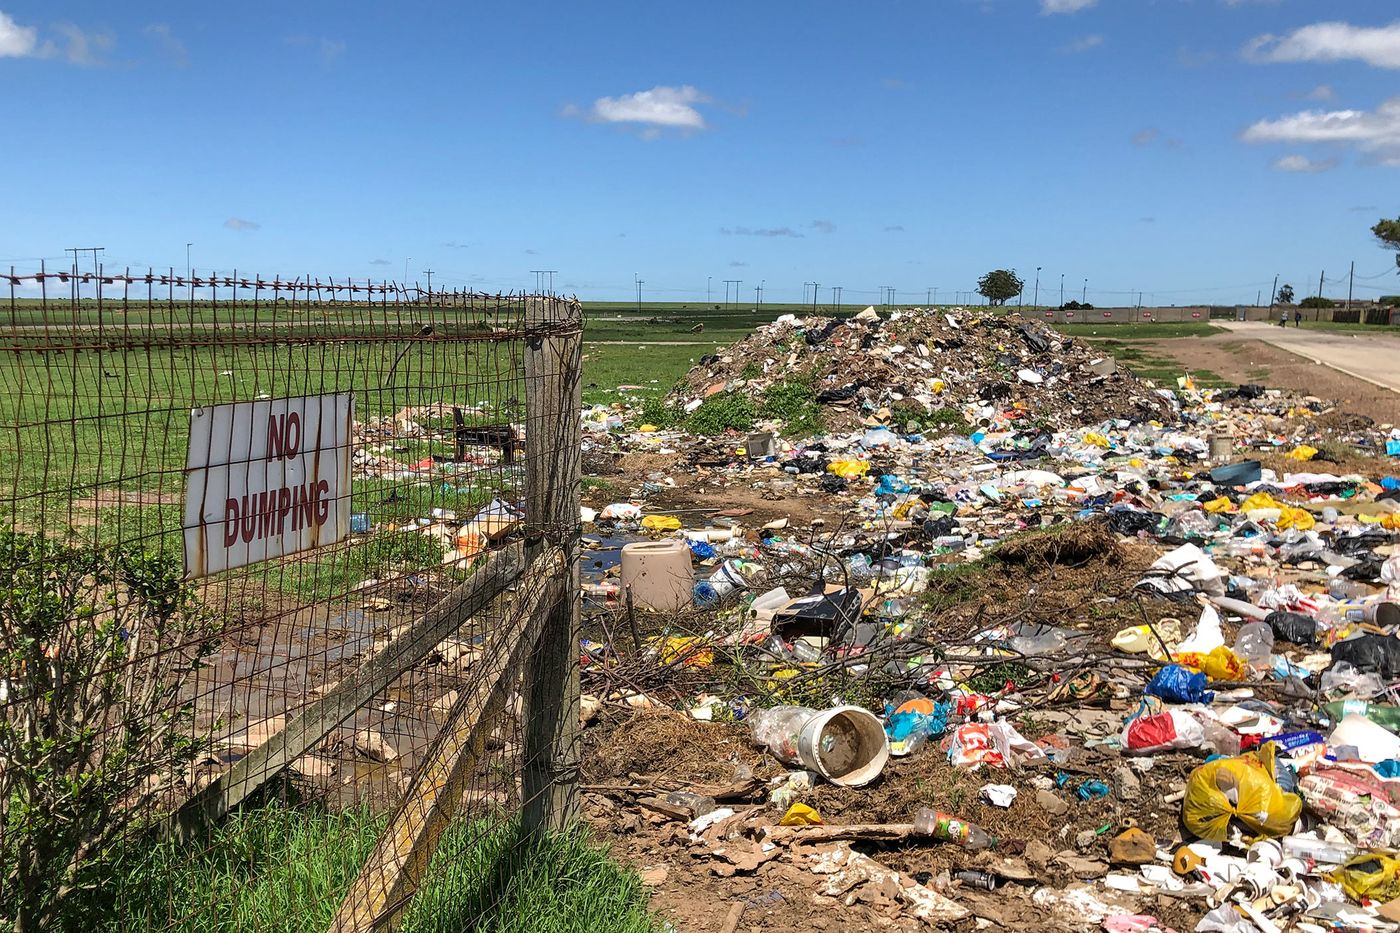 Trash accumulates on the side of a street in the township of Joza. Photographer: Michael Cohen/Bloomberg